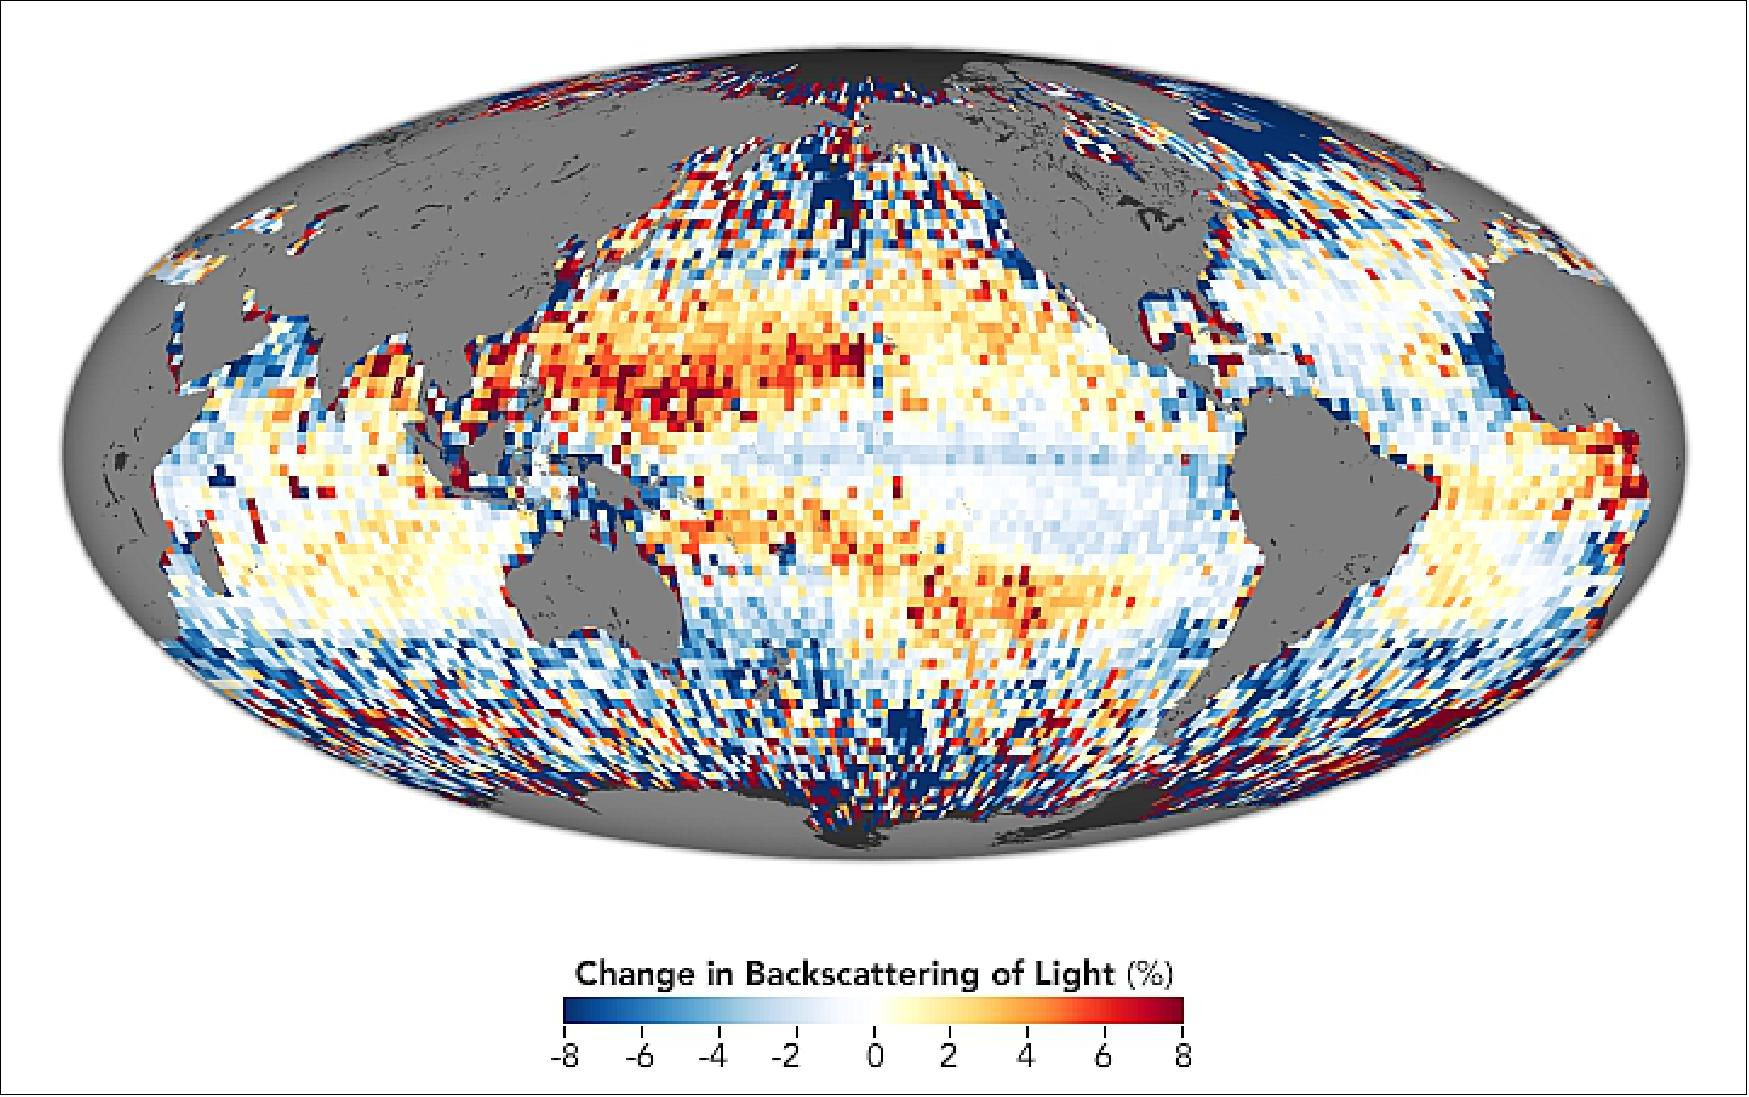 Figure 12: This map shows changes in backscattering of light in the ocean from day to night; that is, the change in the intensity of the reflections of laser pulses back to the CALIPSO satellite. Scientists examined data from the day and night passes of the satellite and noted the difference in the amount of backscattering. Areas colored red or orange had the greatest difference in light scattering, a signal that indicates significant numbers of migrating marine creatures in those areas (image credit: NASA Earth Observatory, image by Joshua Stevens, using data from Behrenfeld, M. J., et al. (2019), Story by Joseph Atkinson, NASA Langley Research Center, with Michael Carlowicz)